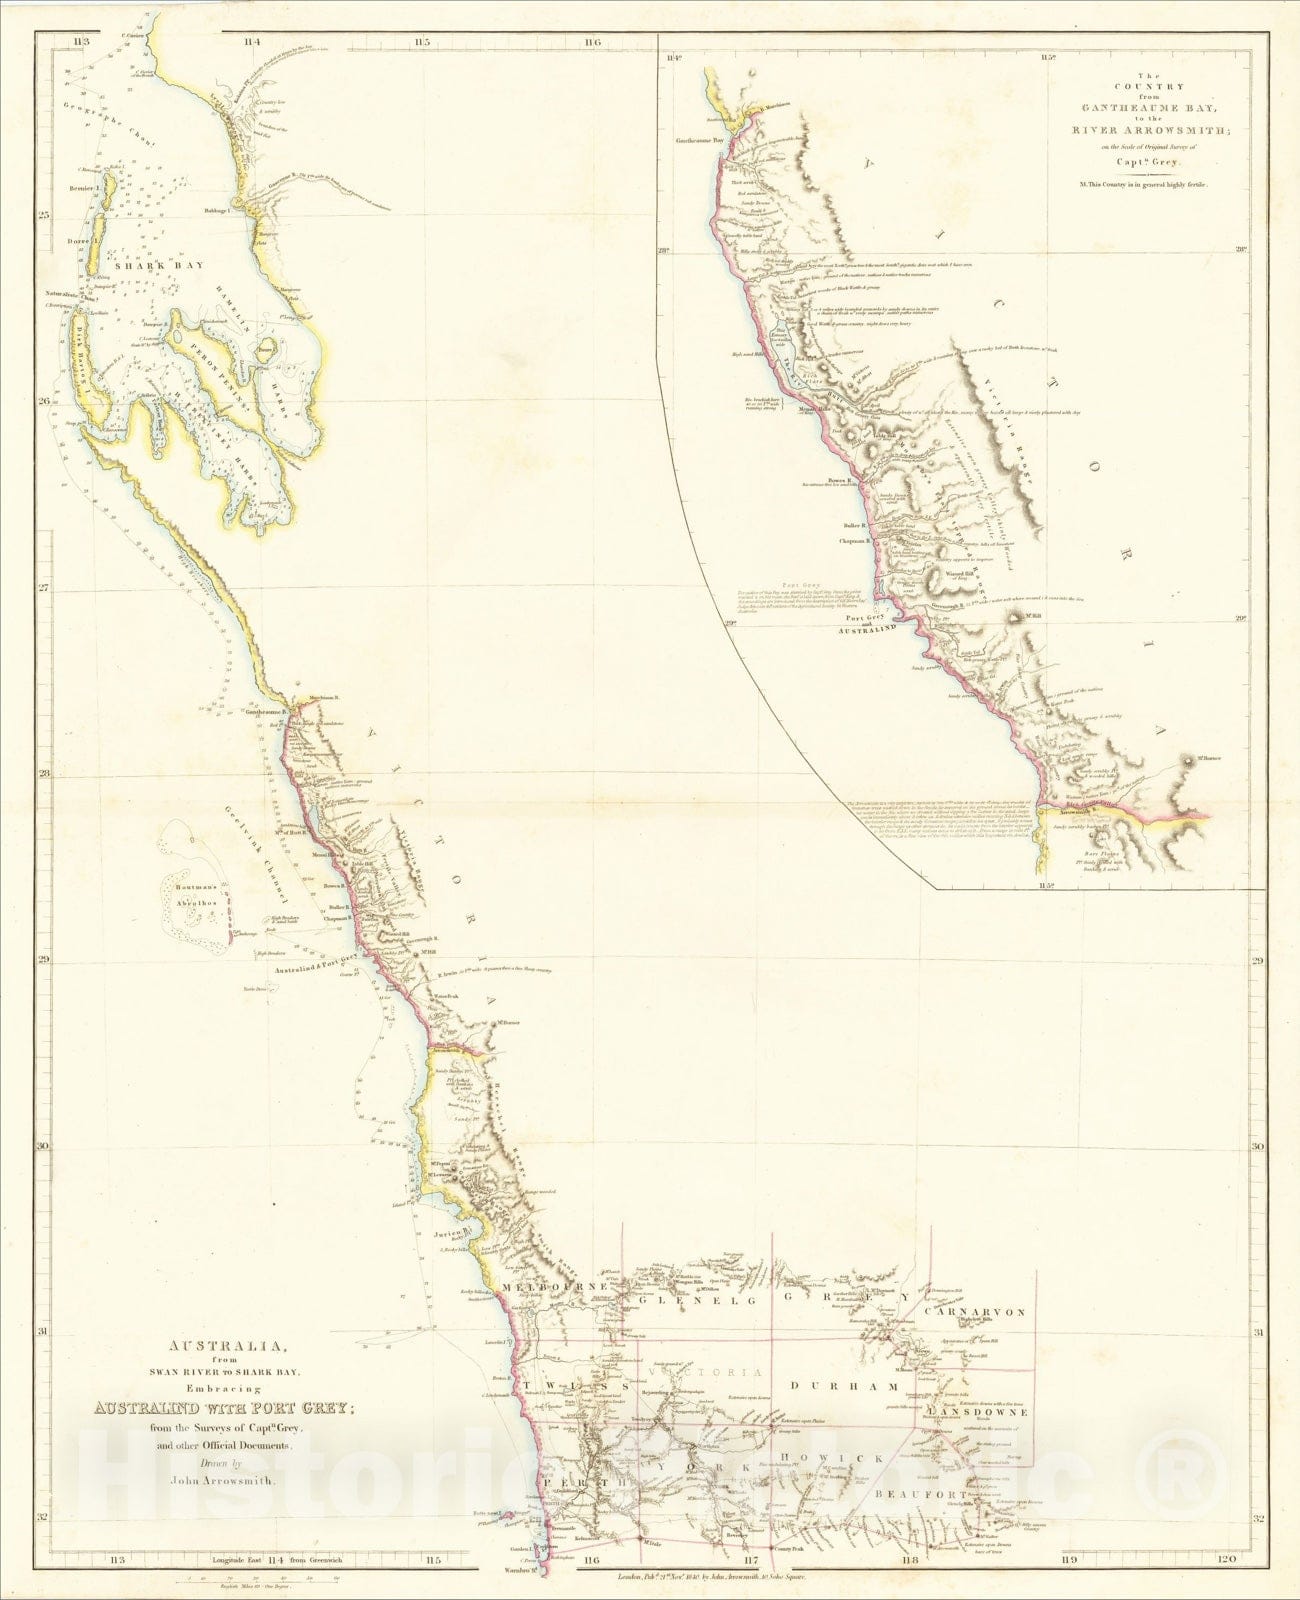 Historic Map : Australia, from Swan River to Shark Bay, Embracing Australind with Port Grey, 1840, John Arrowsmith, Vintage Wall Art